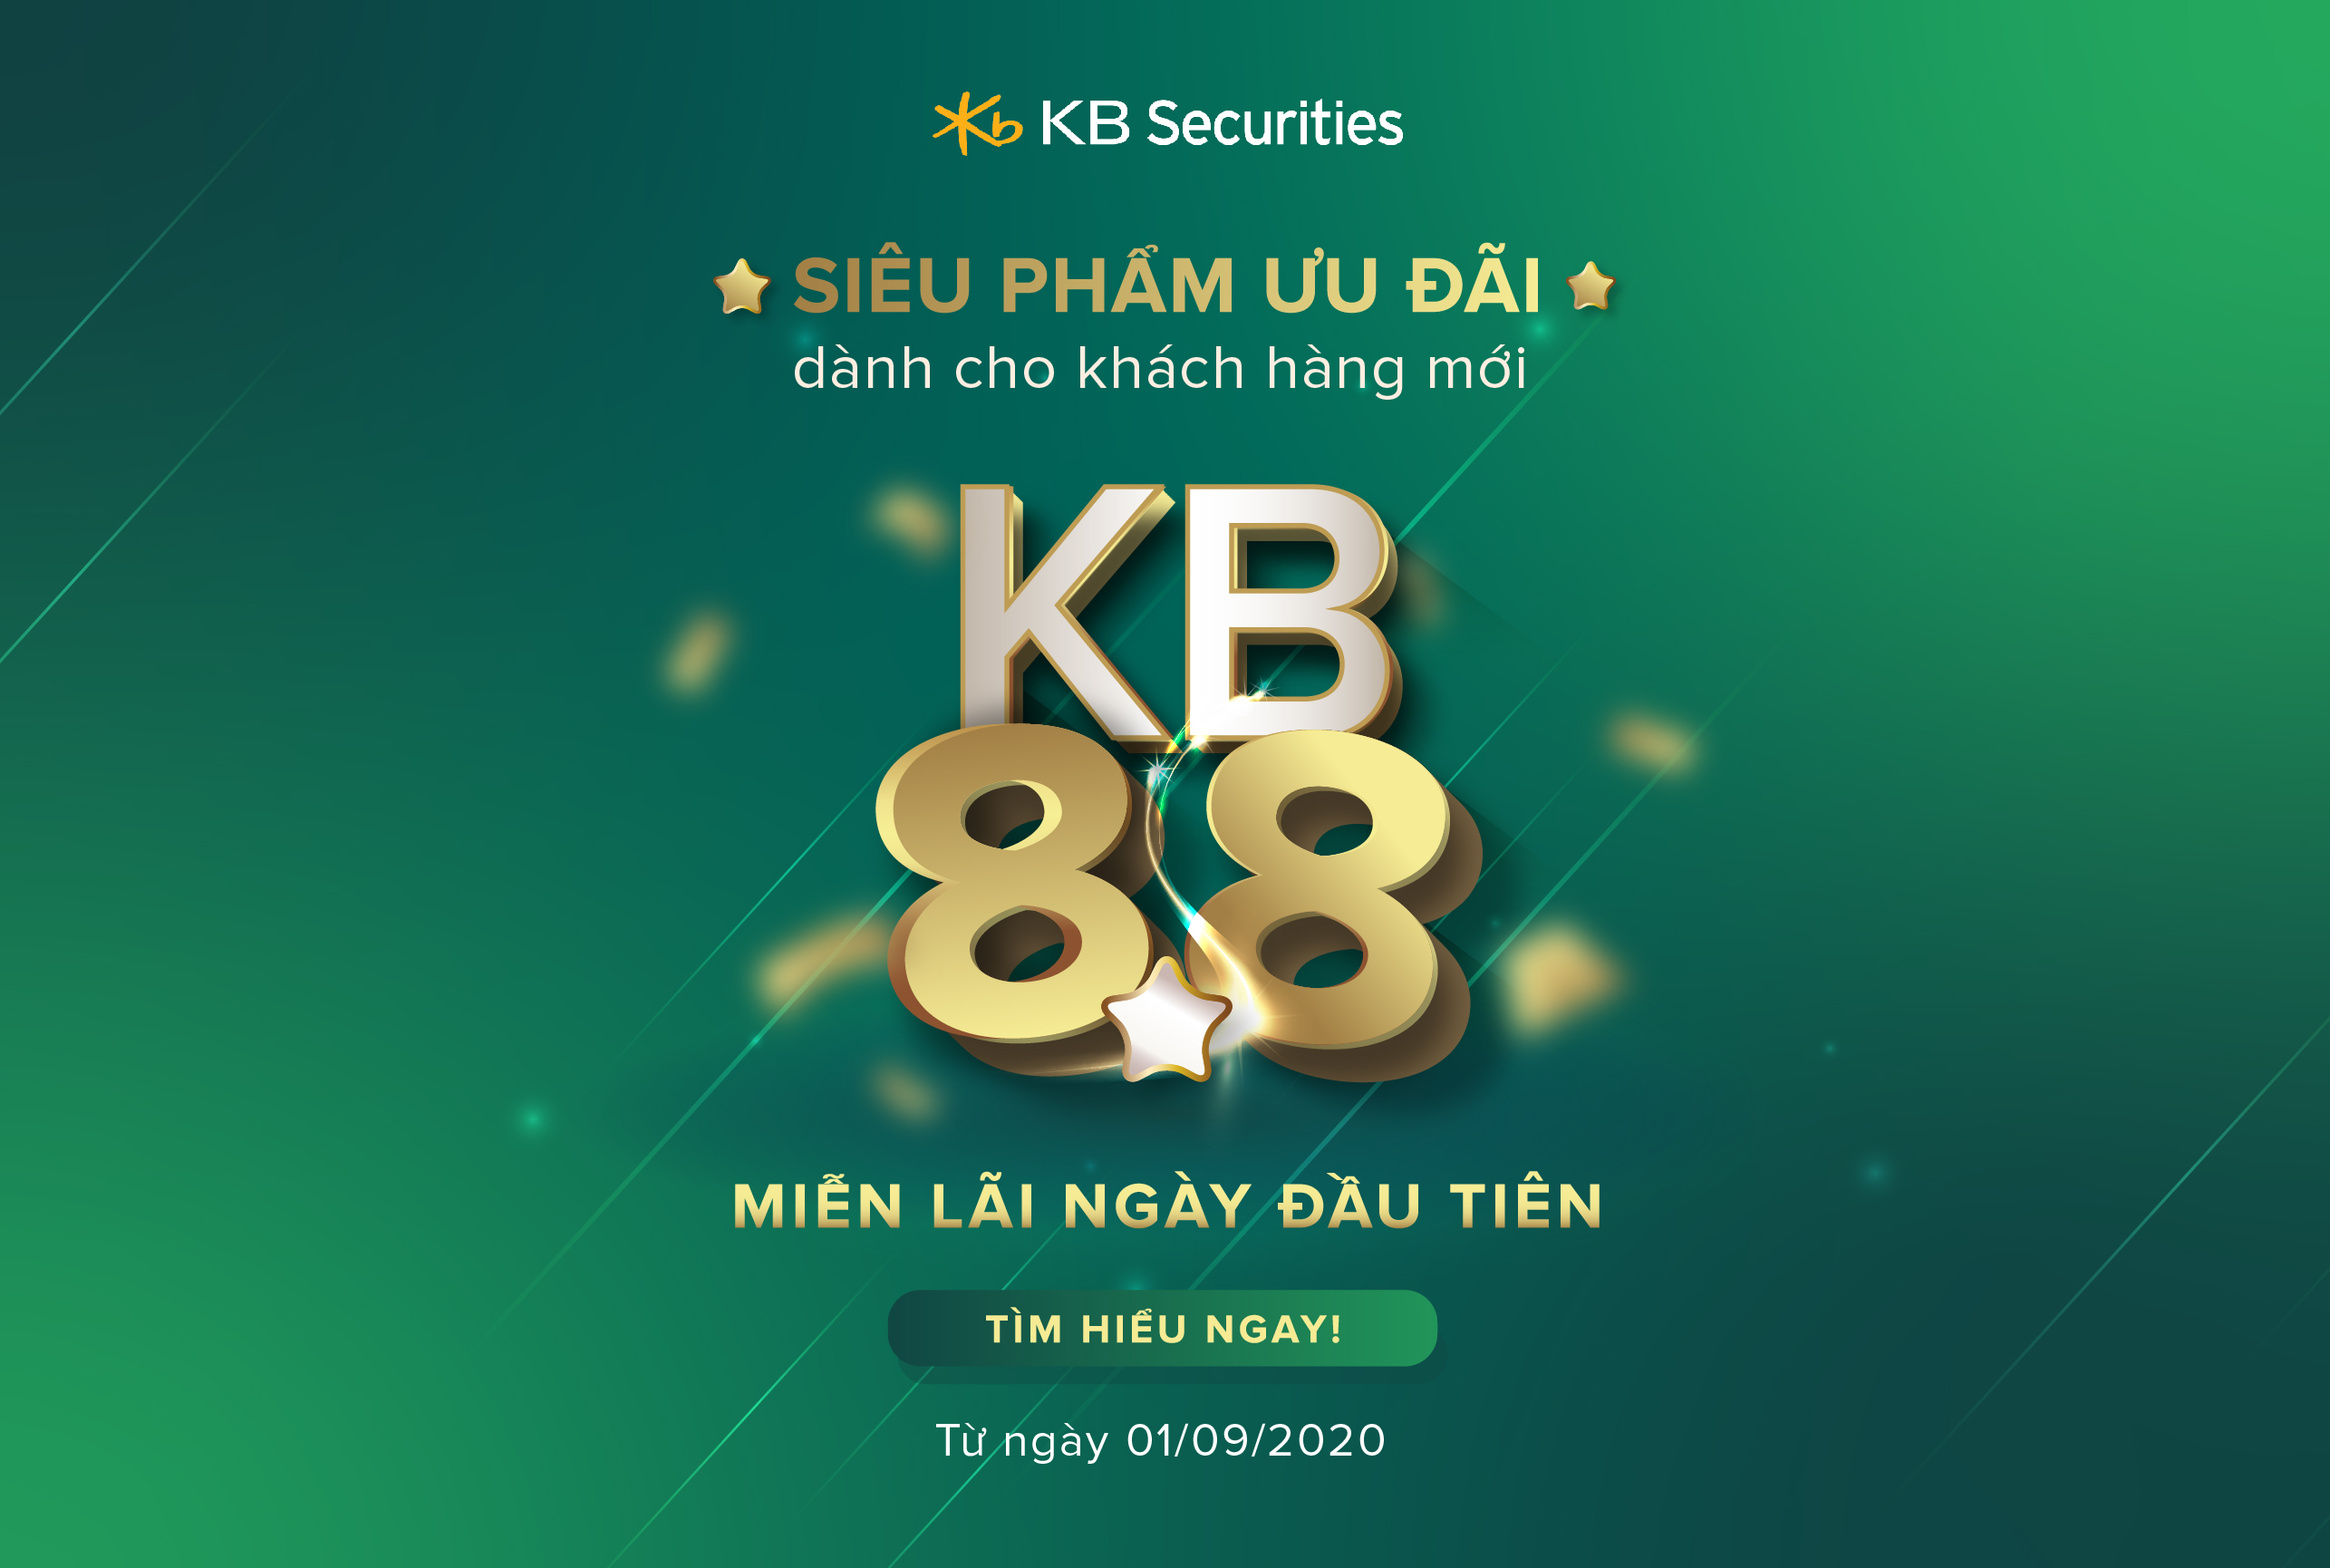 Launching KB 8.8 promotion and reducing standard financial service interest rate - KBSVs strong movement to support investors in the Covid-19 context